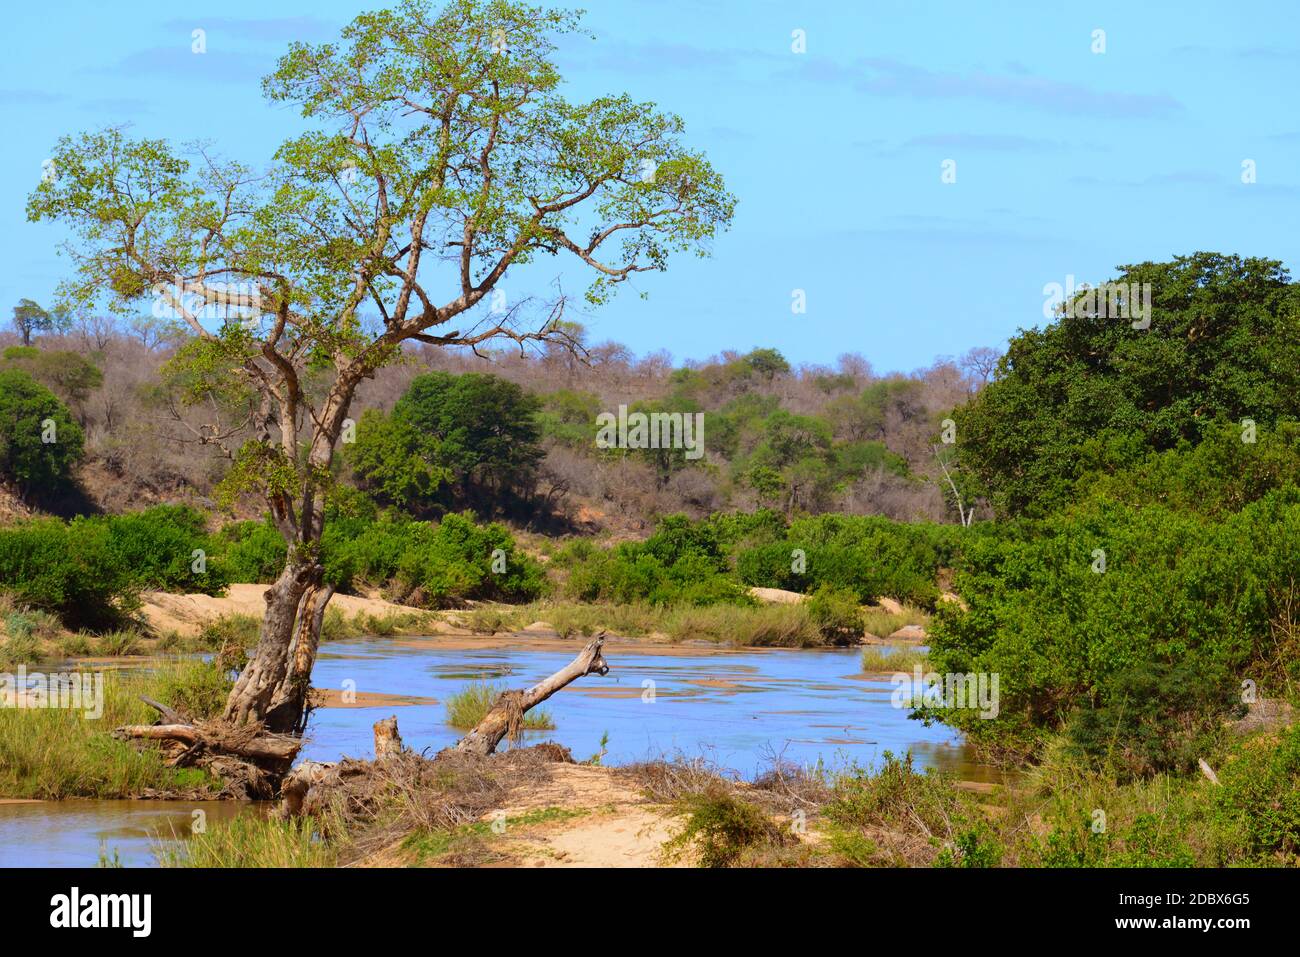 Landscape of the Kruger National Park in South Africa.The Kruger Park is located in the flat Lowveld, the central part at an average height of 250 m above sea level. Stock Photo